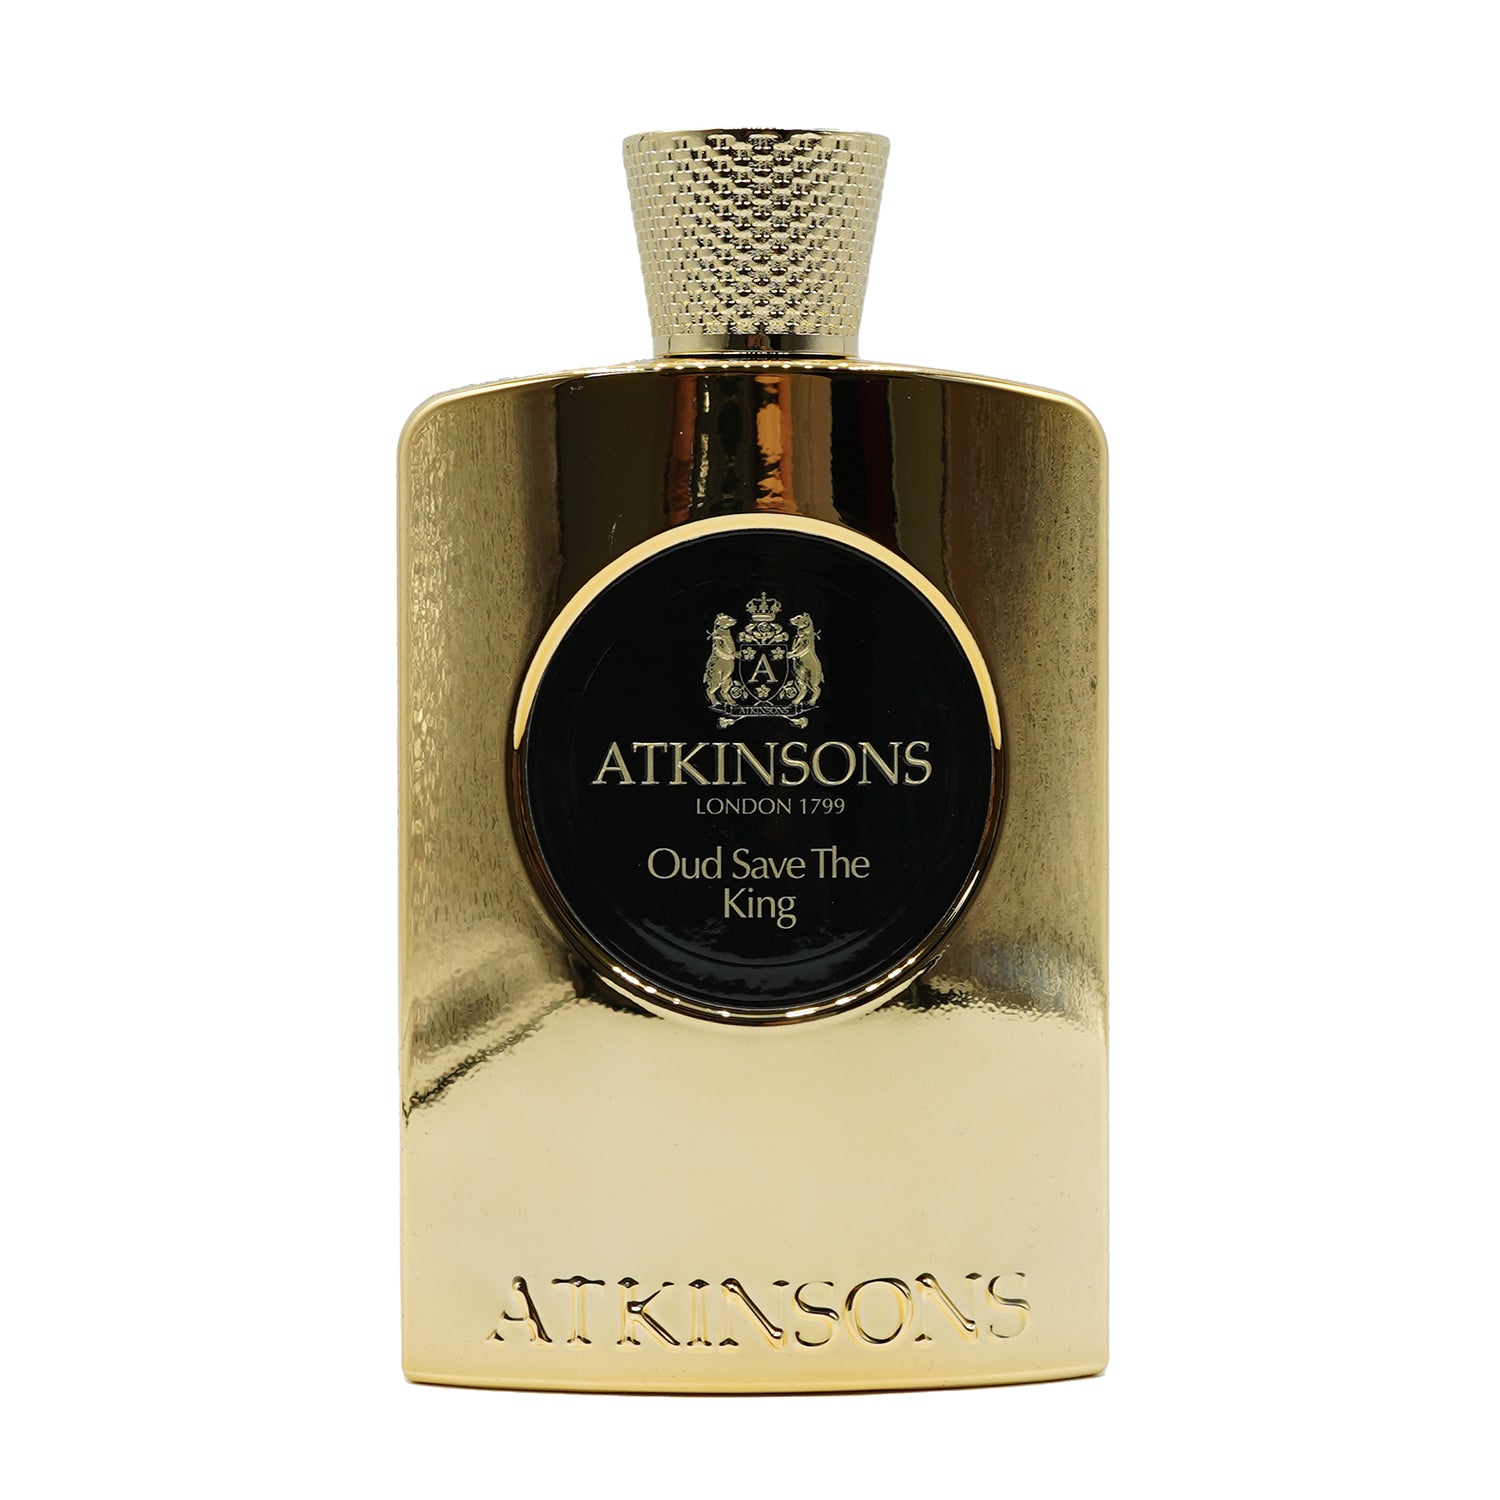 Atkinsons | Oud Save The King bottling 